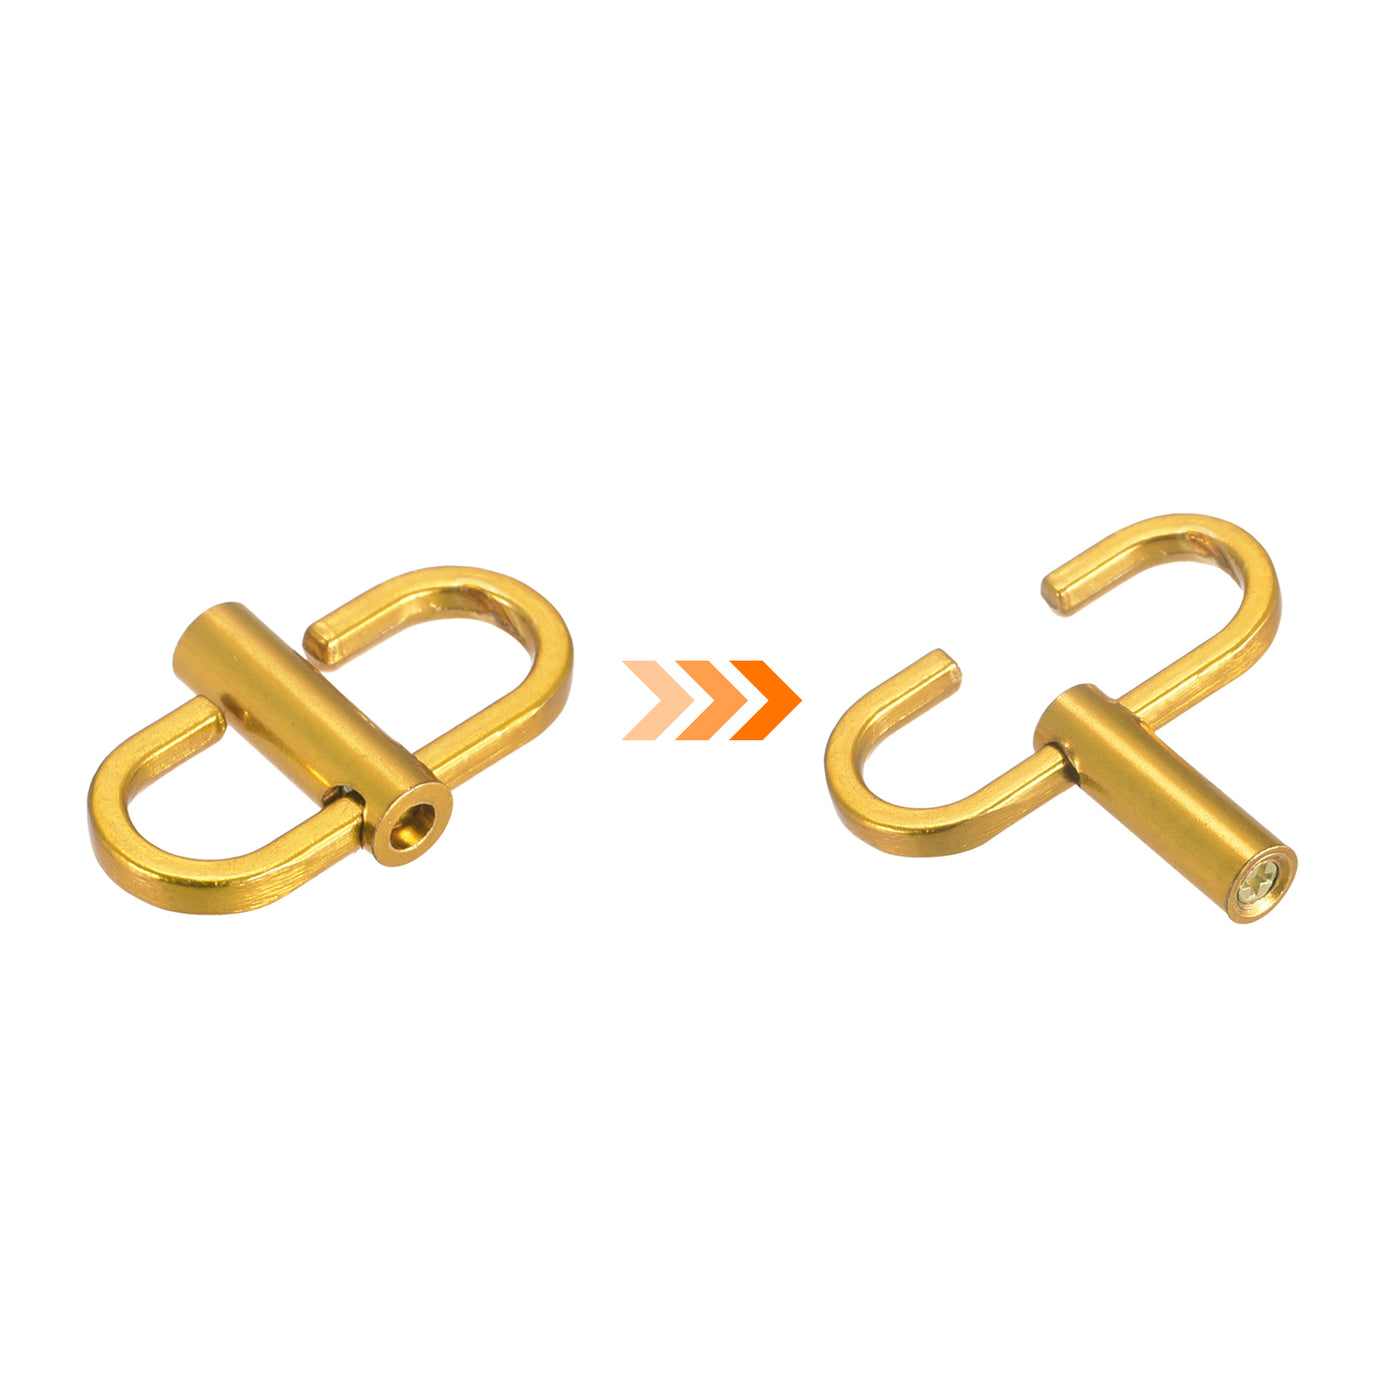 uxcell Uxcell Adjustable Metal Buckles for Chain Strap, 5Pcs 22x13mm Chain Shortener, Yellow